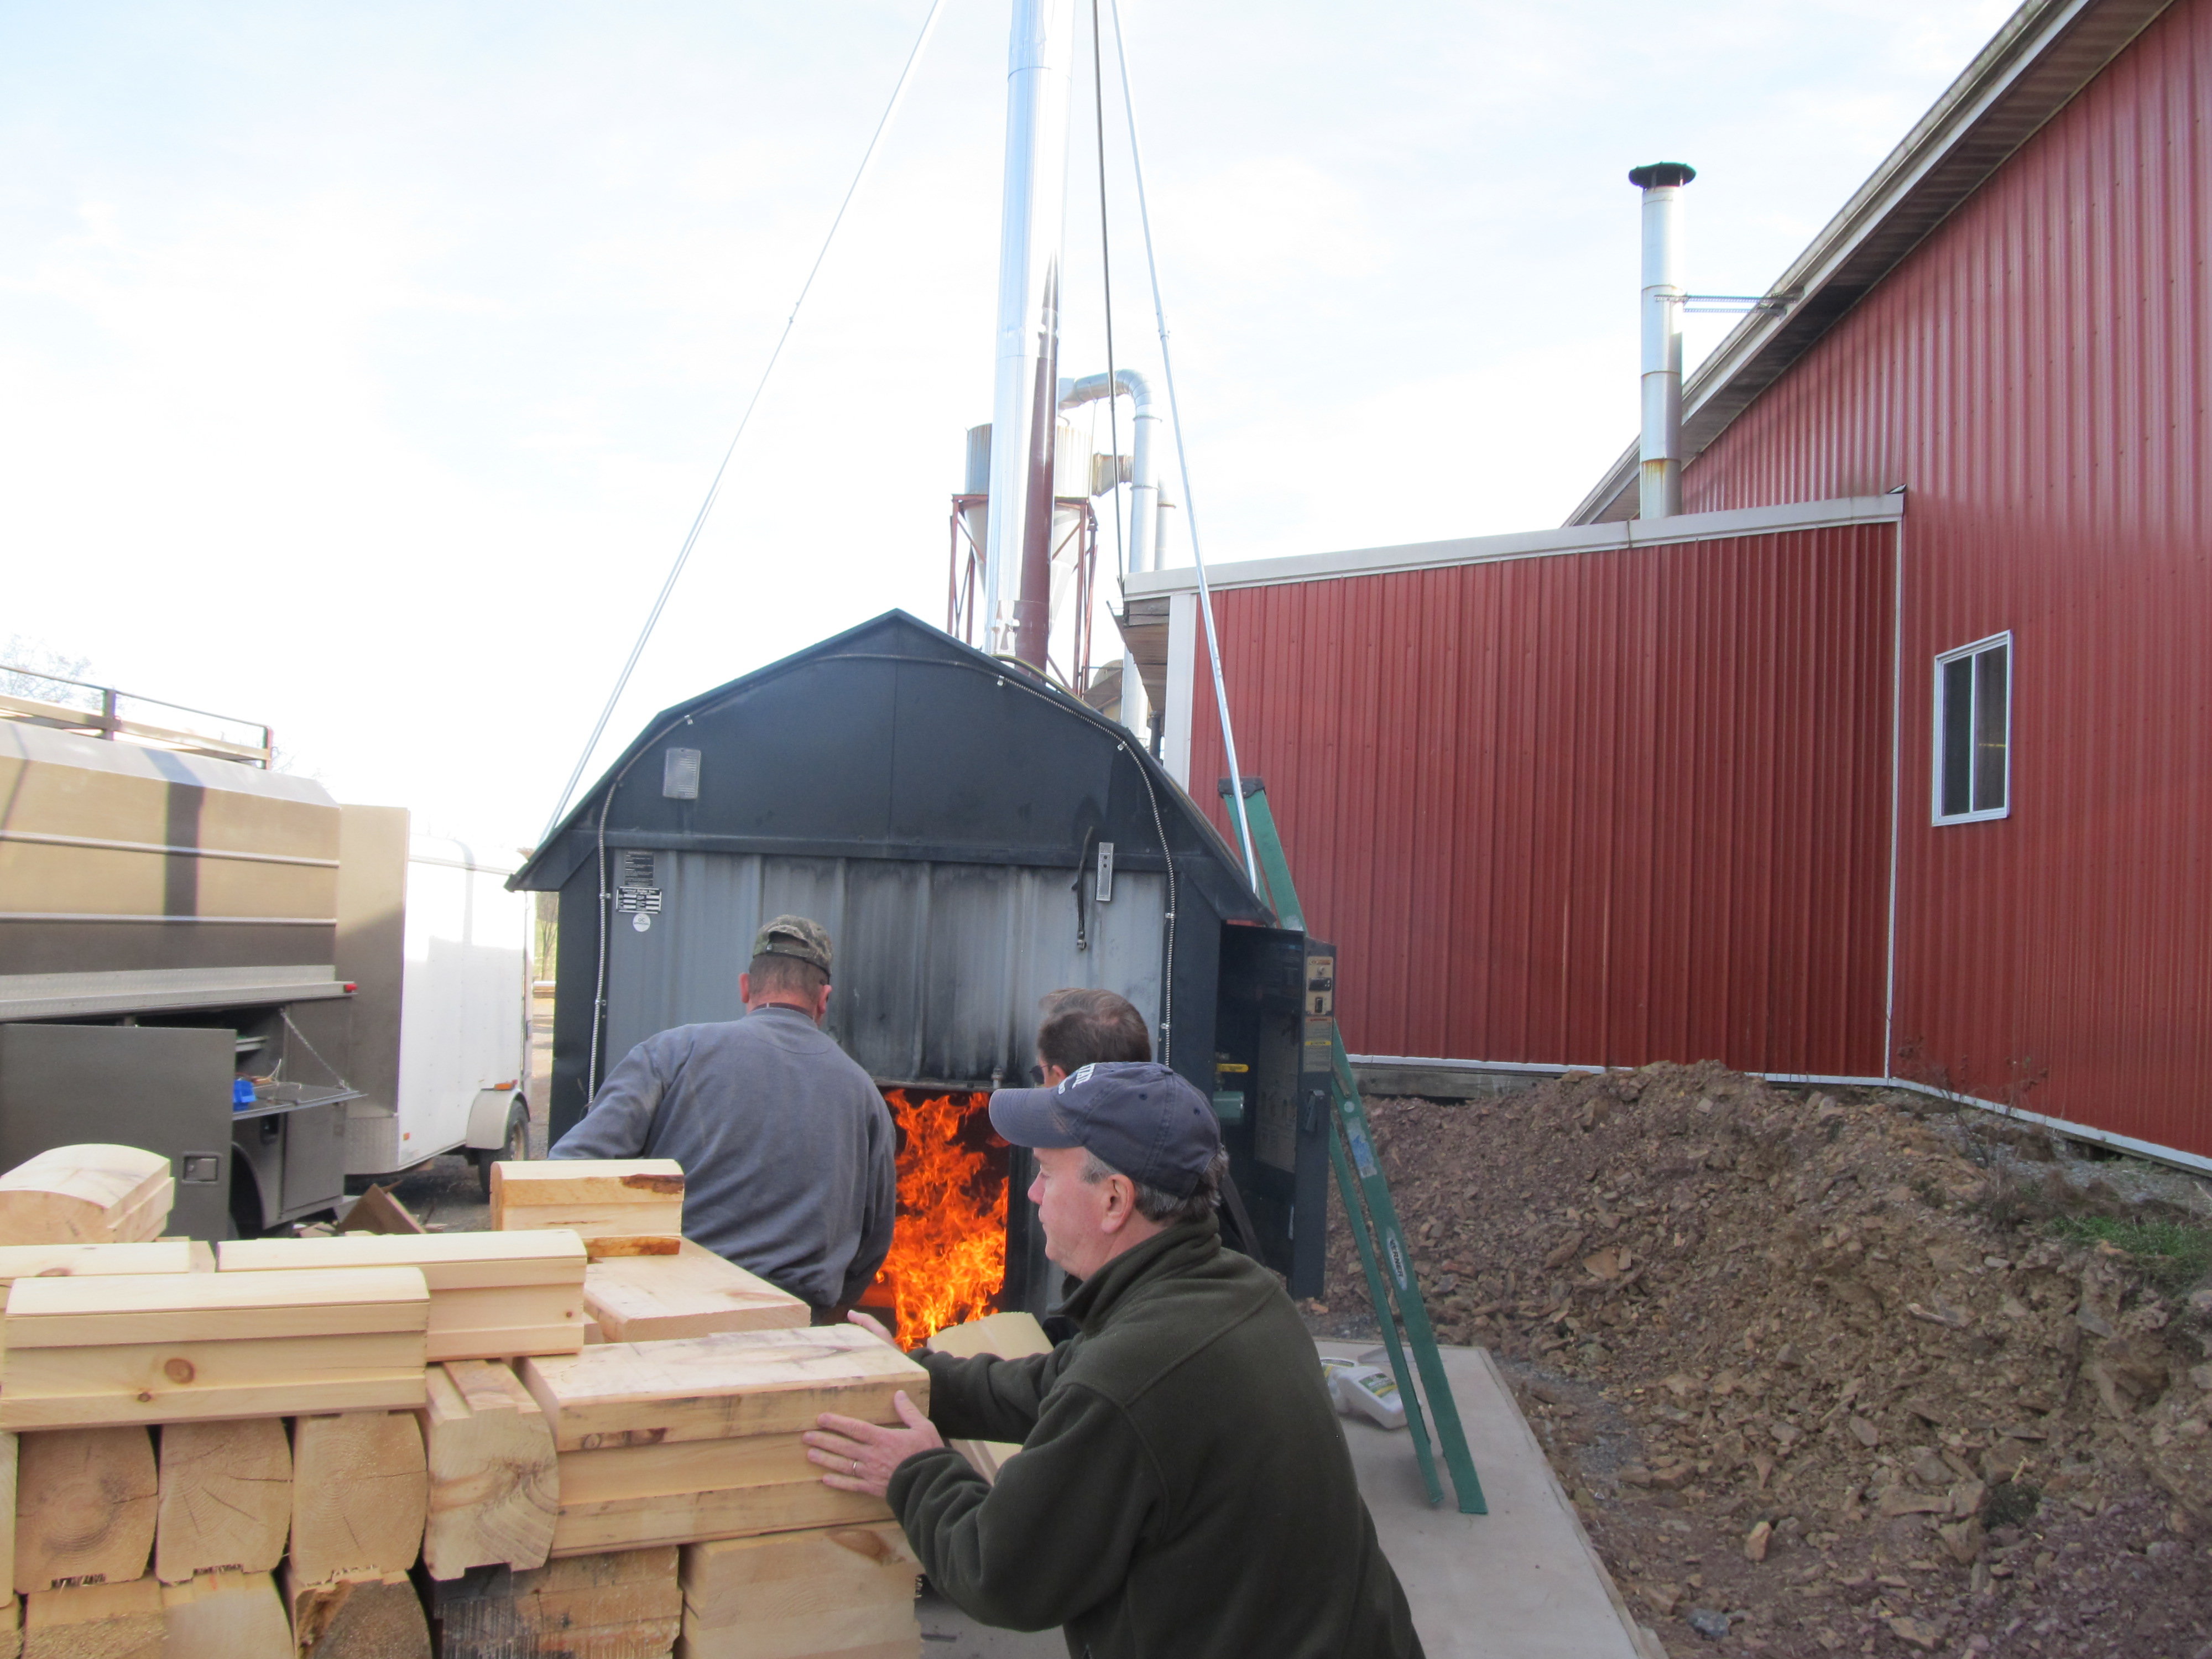 waste material being loaded into an outdoor wood burner, Timberhaven Log Homes, log homes, log cabin homes, log cabins, post and beam homes, timberframe homes, timber frame homes, laminated logs, engineered logs, floor plan designs, kiln dried logs, nature friendly